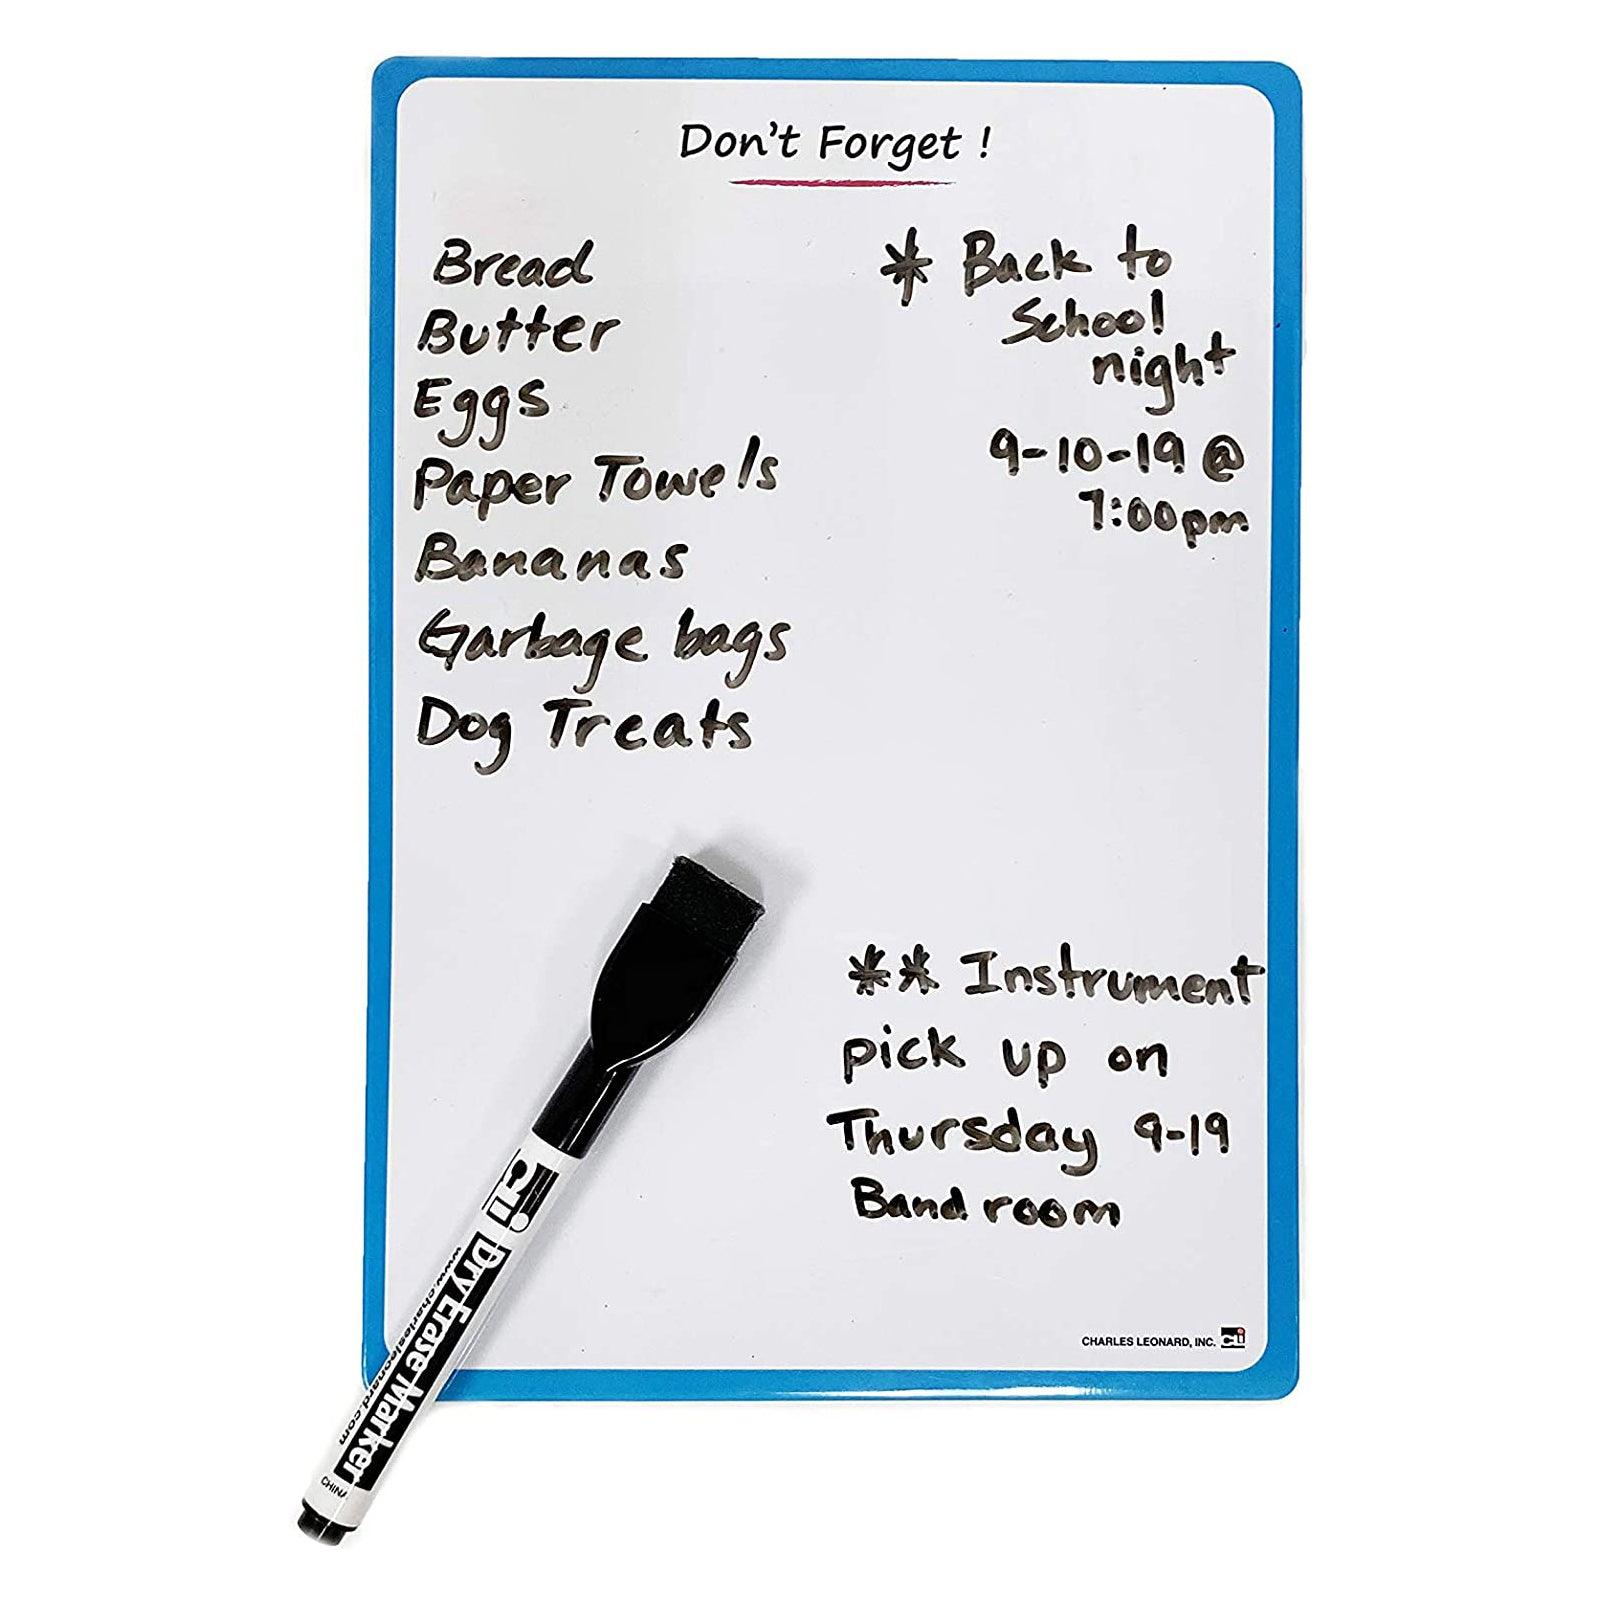 Magnetic Mini Dry Erase Boards, 6-1/4" x 9", Marker w/Eraser and 1 Magnet, Blue Frame, Pack of 12 - Loomini